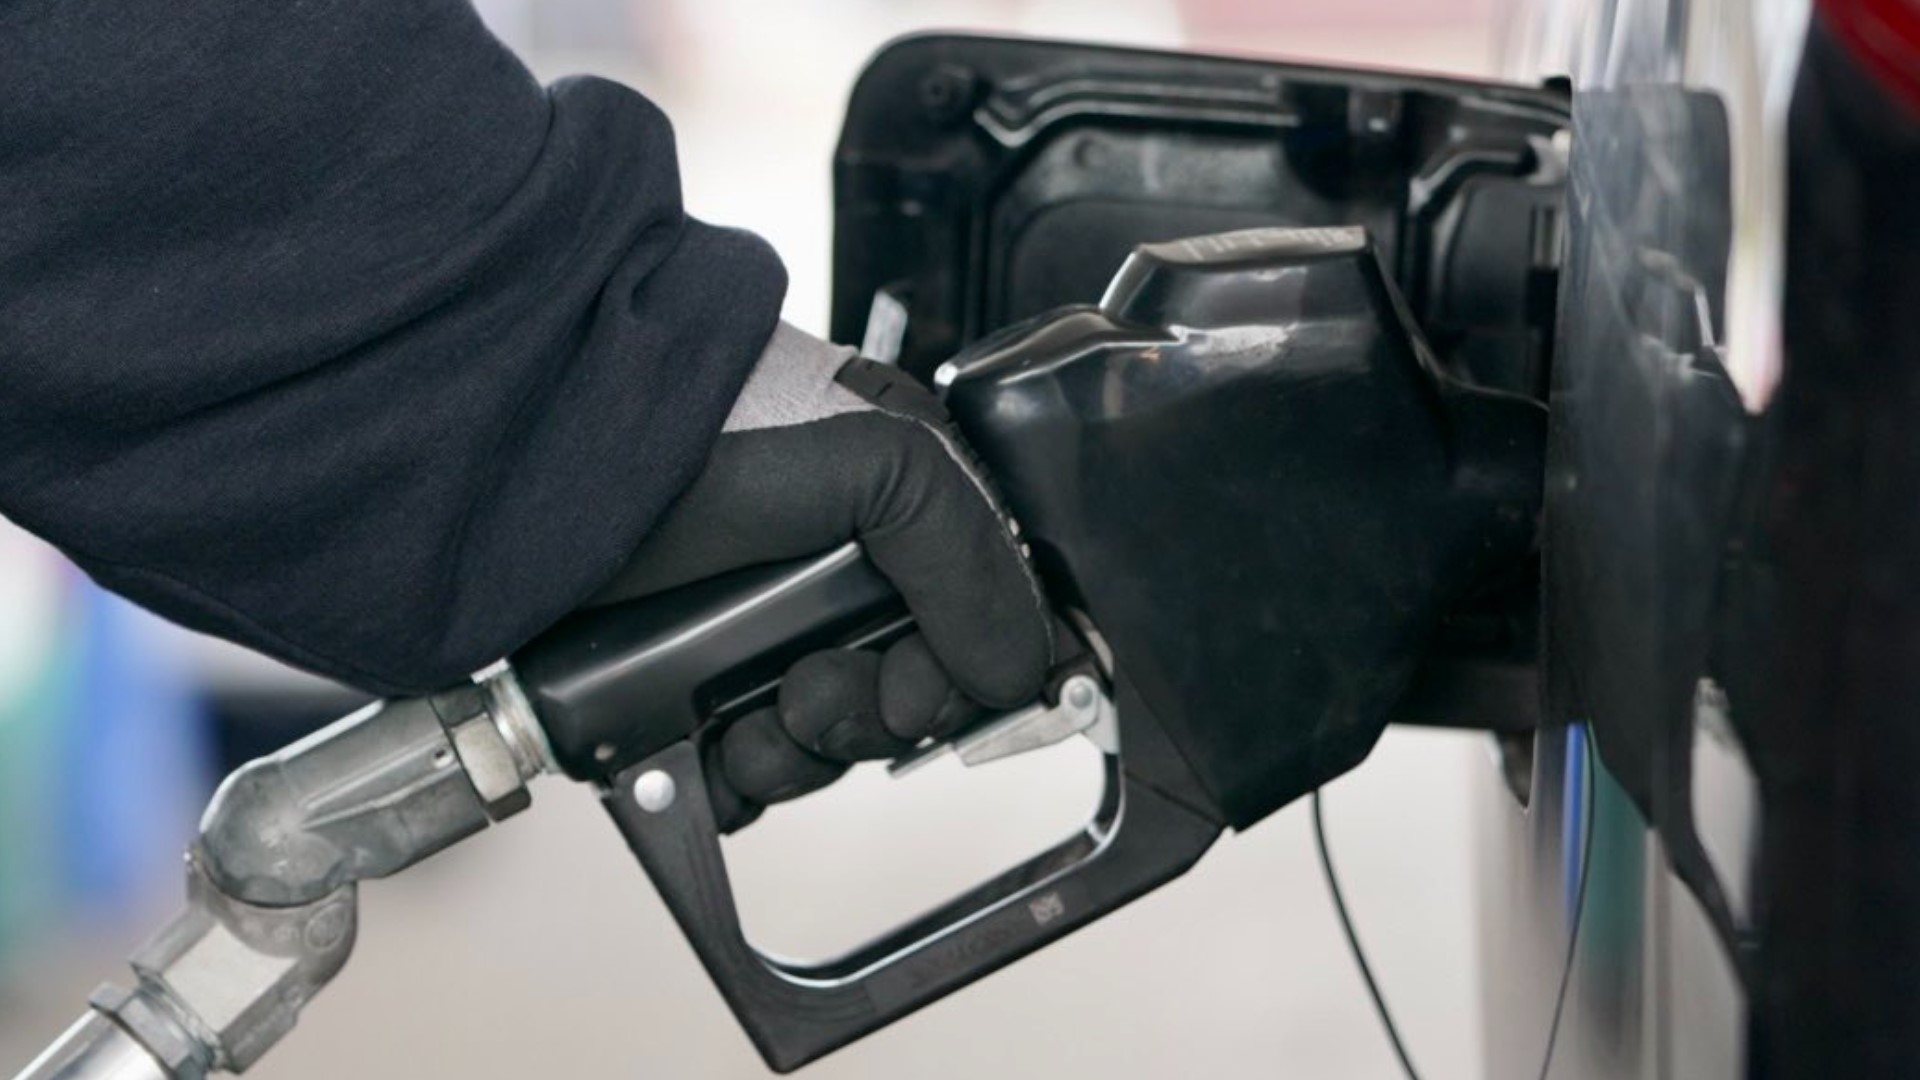 The average price at the pump averaged $2.99 per gallon after a survey of over 1,800 gas stations in Arkansas.